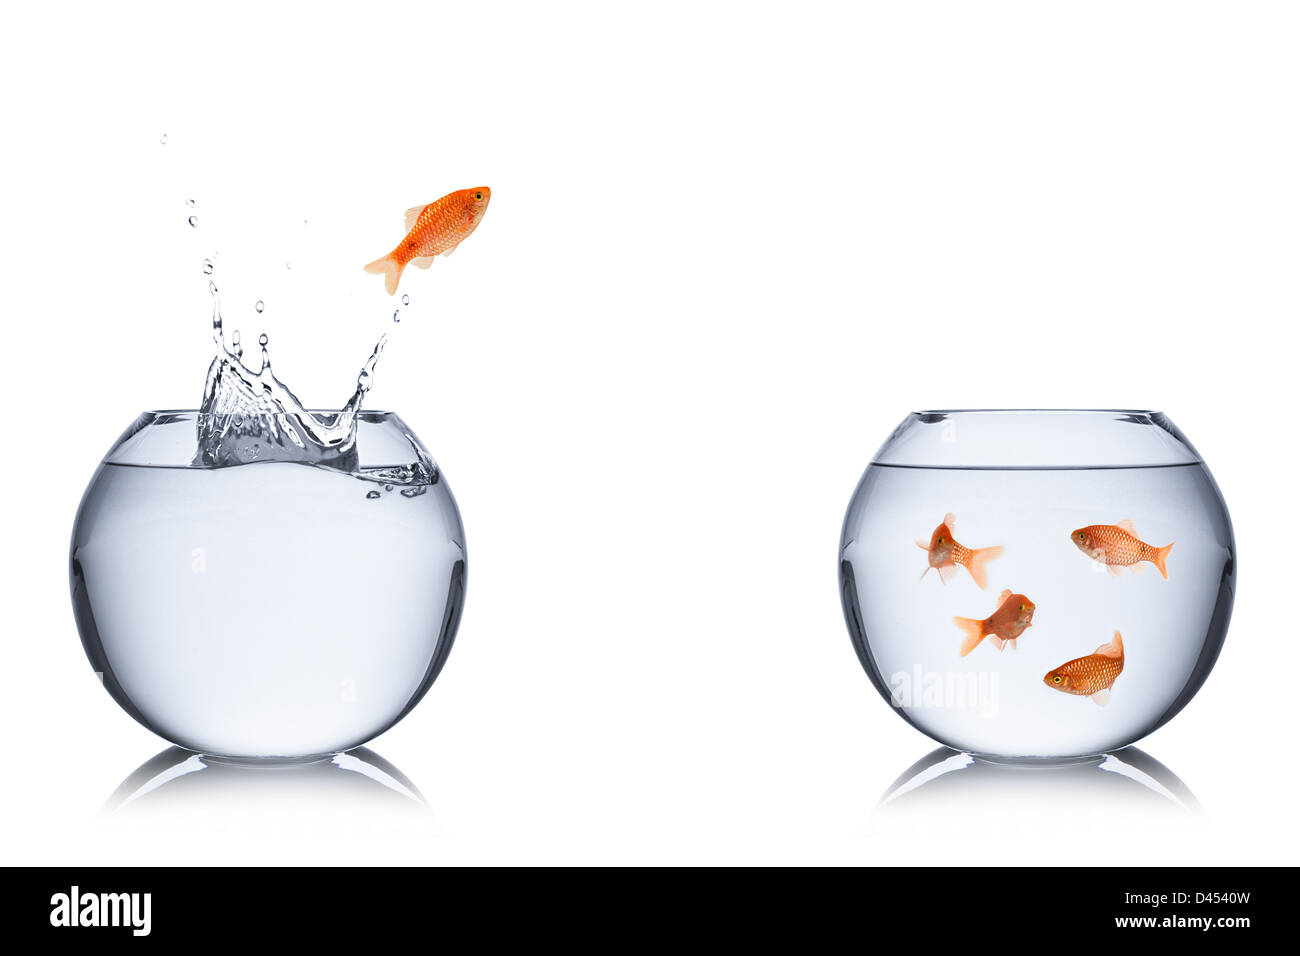 fish jumps out of bowl into another. Stock Photo